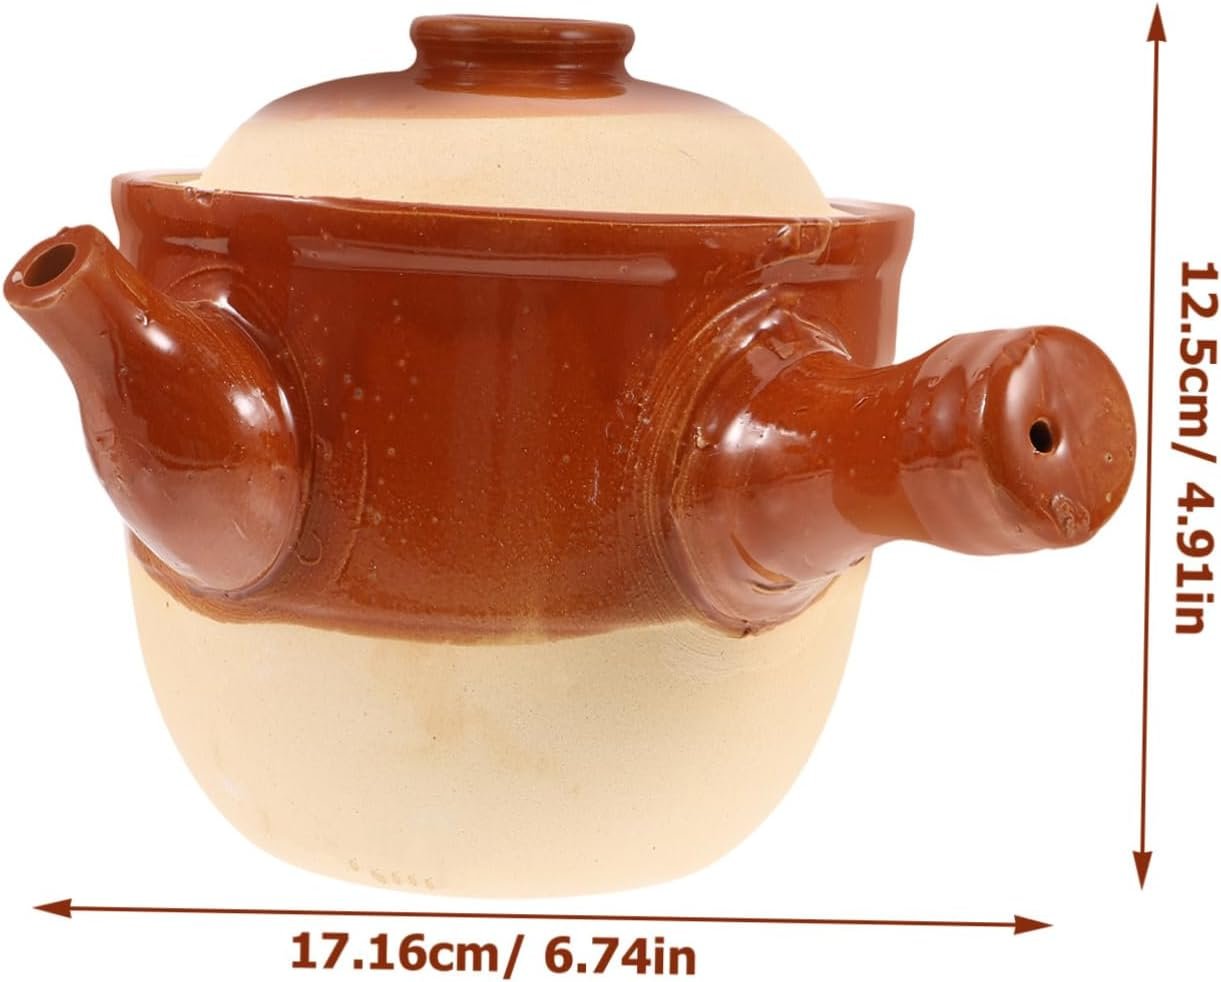 FELTECHELECTR Traditional Chinese Medicine Pot Ceramic Oven Pot Medicine Cooker Pot Ceramic Griddle Ceramic Cooking Pot Ceramic Pot Peony Saucepan with Lid Home Supply Clay Korean South Korea